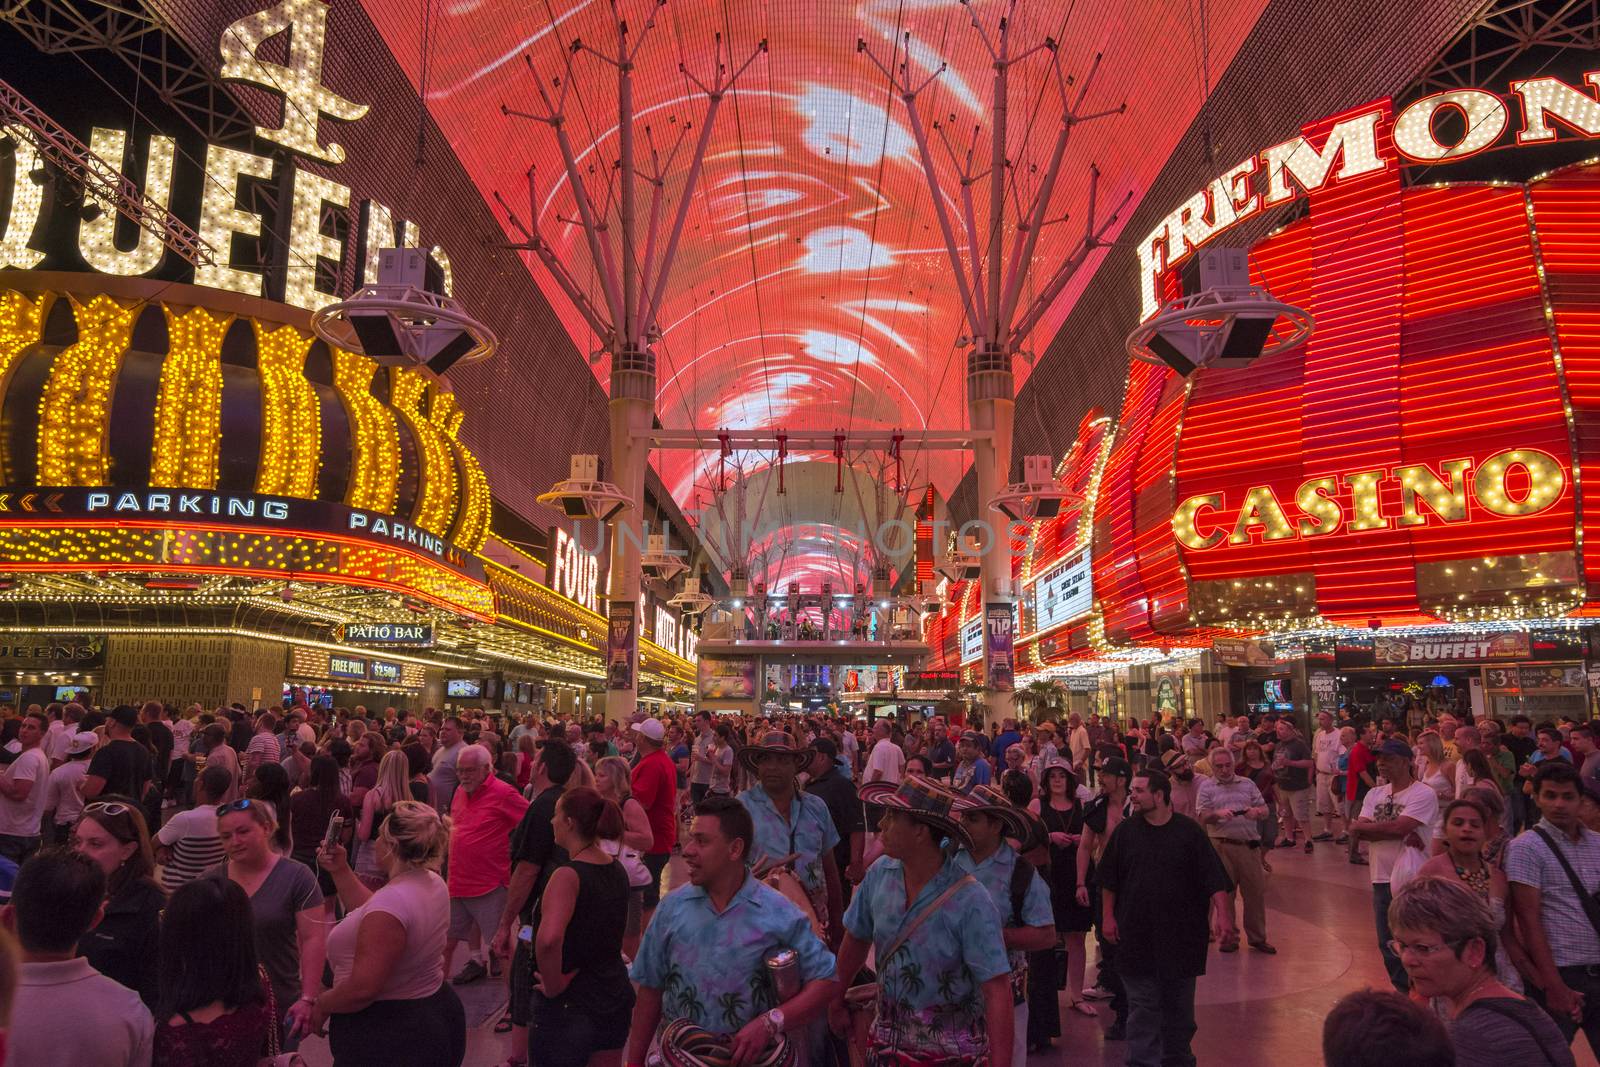 LAS VEGAS, USA - MAY 28, 2015: Huge crowds of tourists gather under the world's largest video screen to enjoy live entertainment, beer, food and casinos at the Fremont Street Experience in Las Vegas